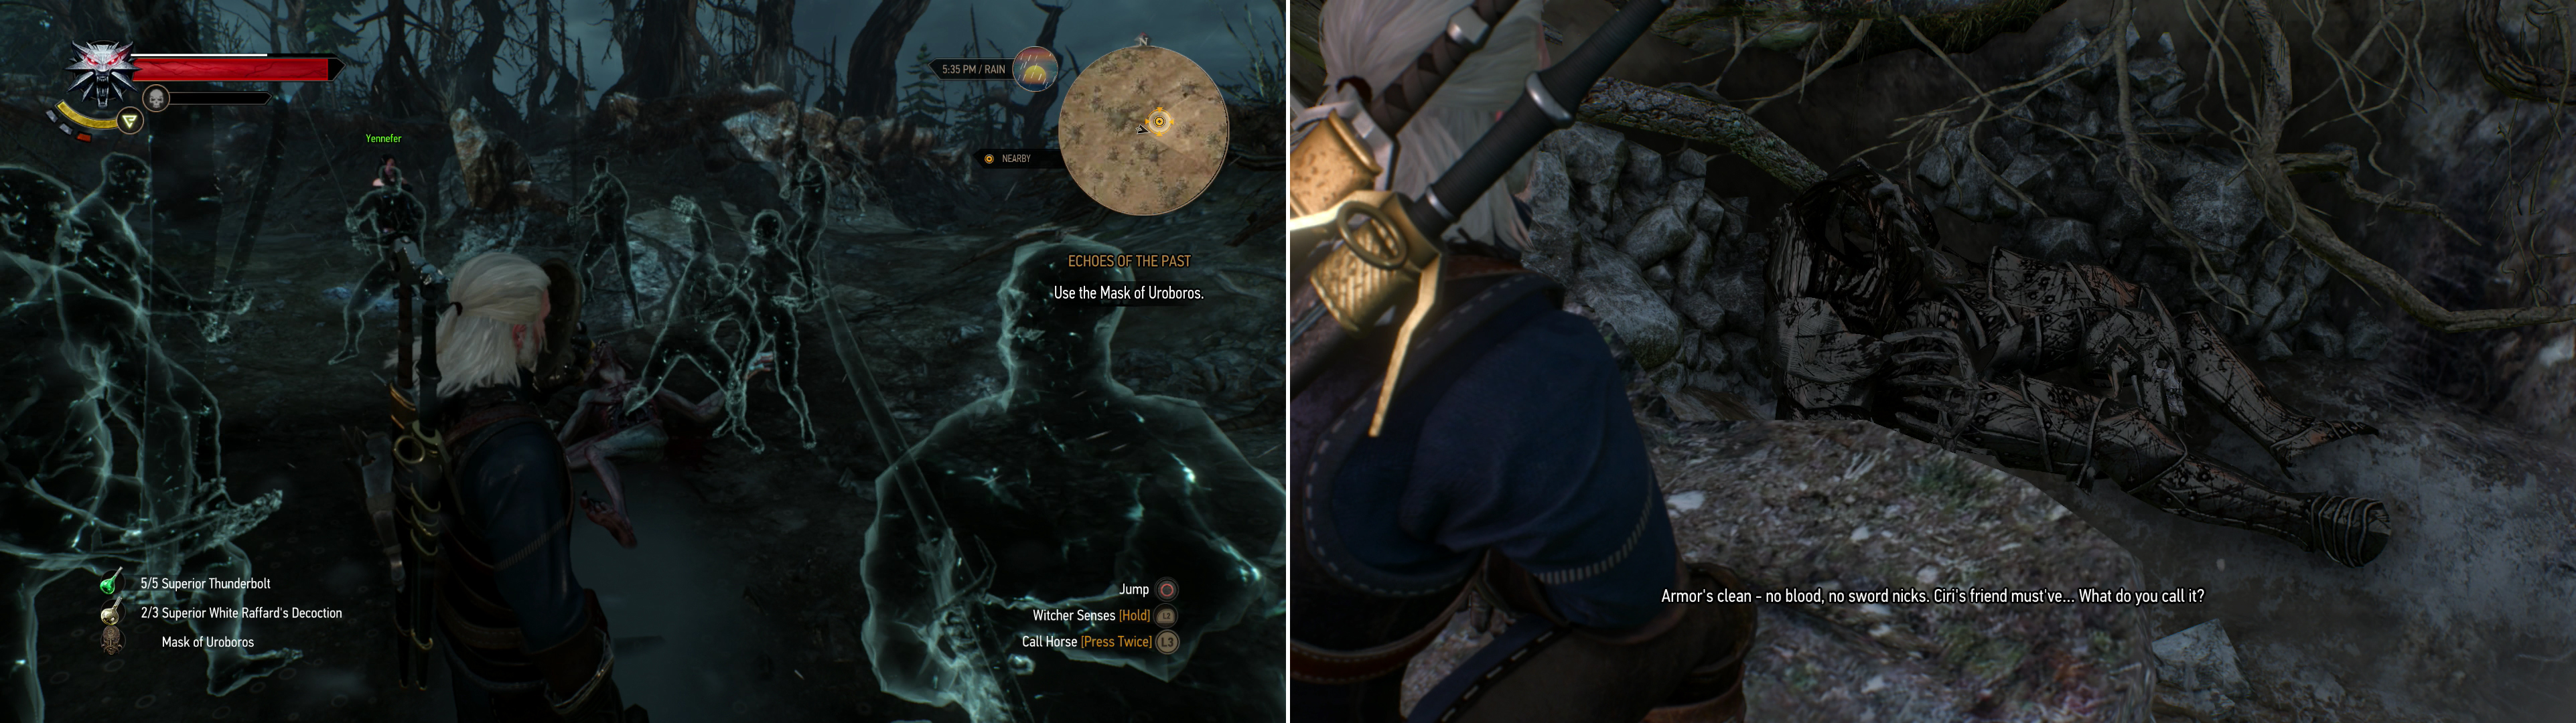 Use the Mask of Uroboros to witness figments of the past (left). A corpse at the end of your search reveals the nature of Ciri's foe (right).